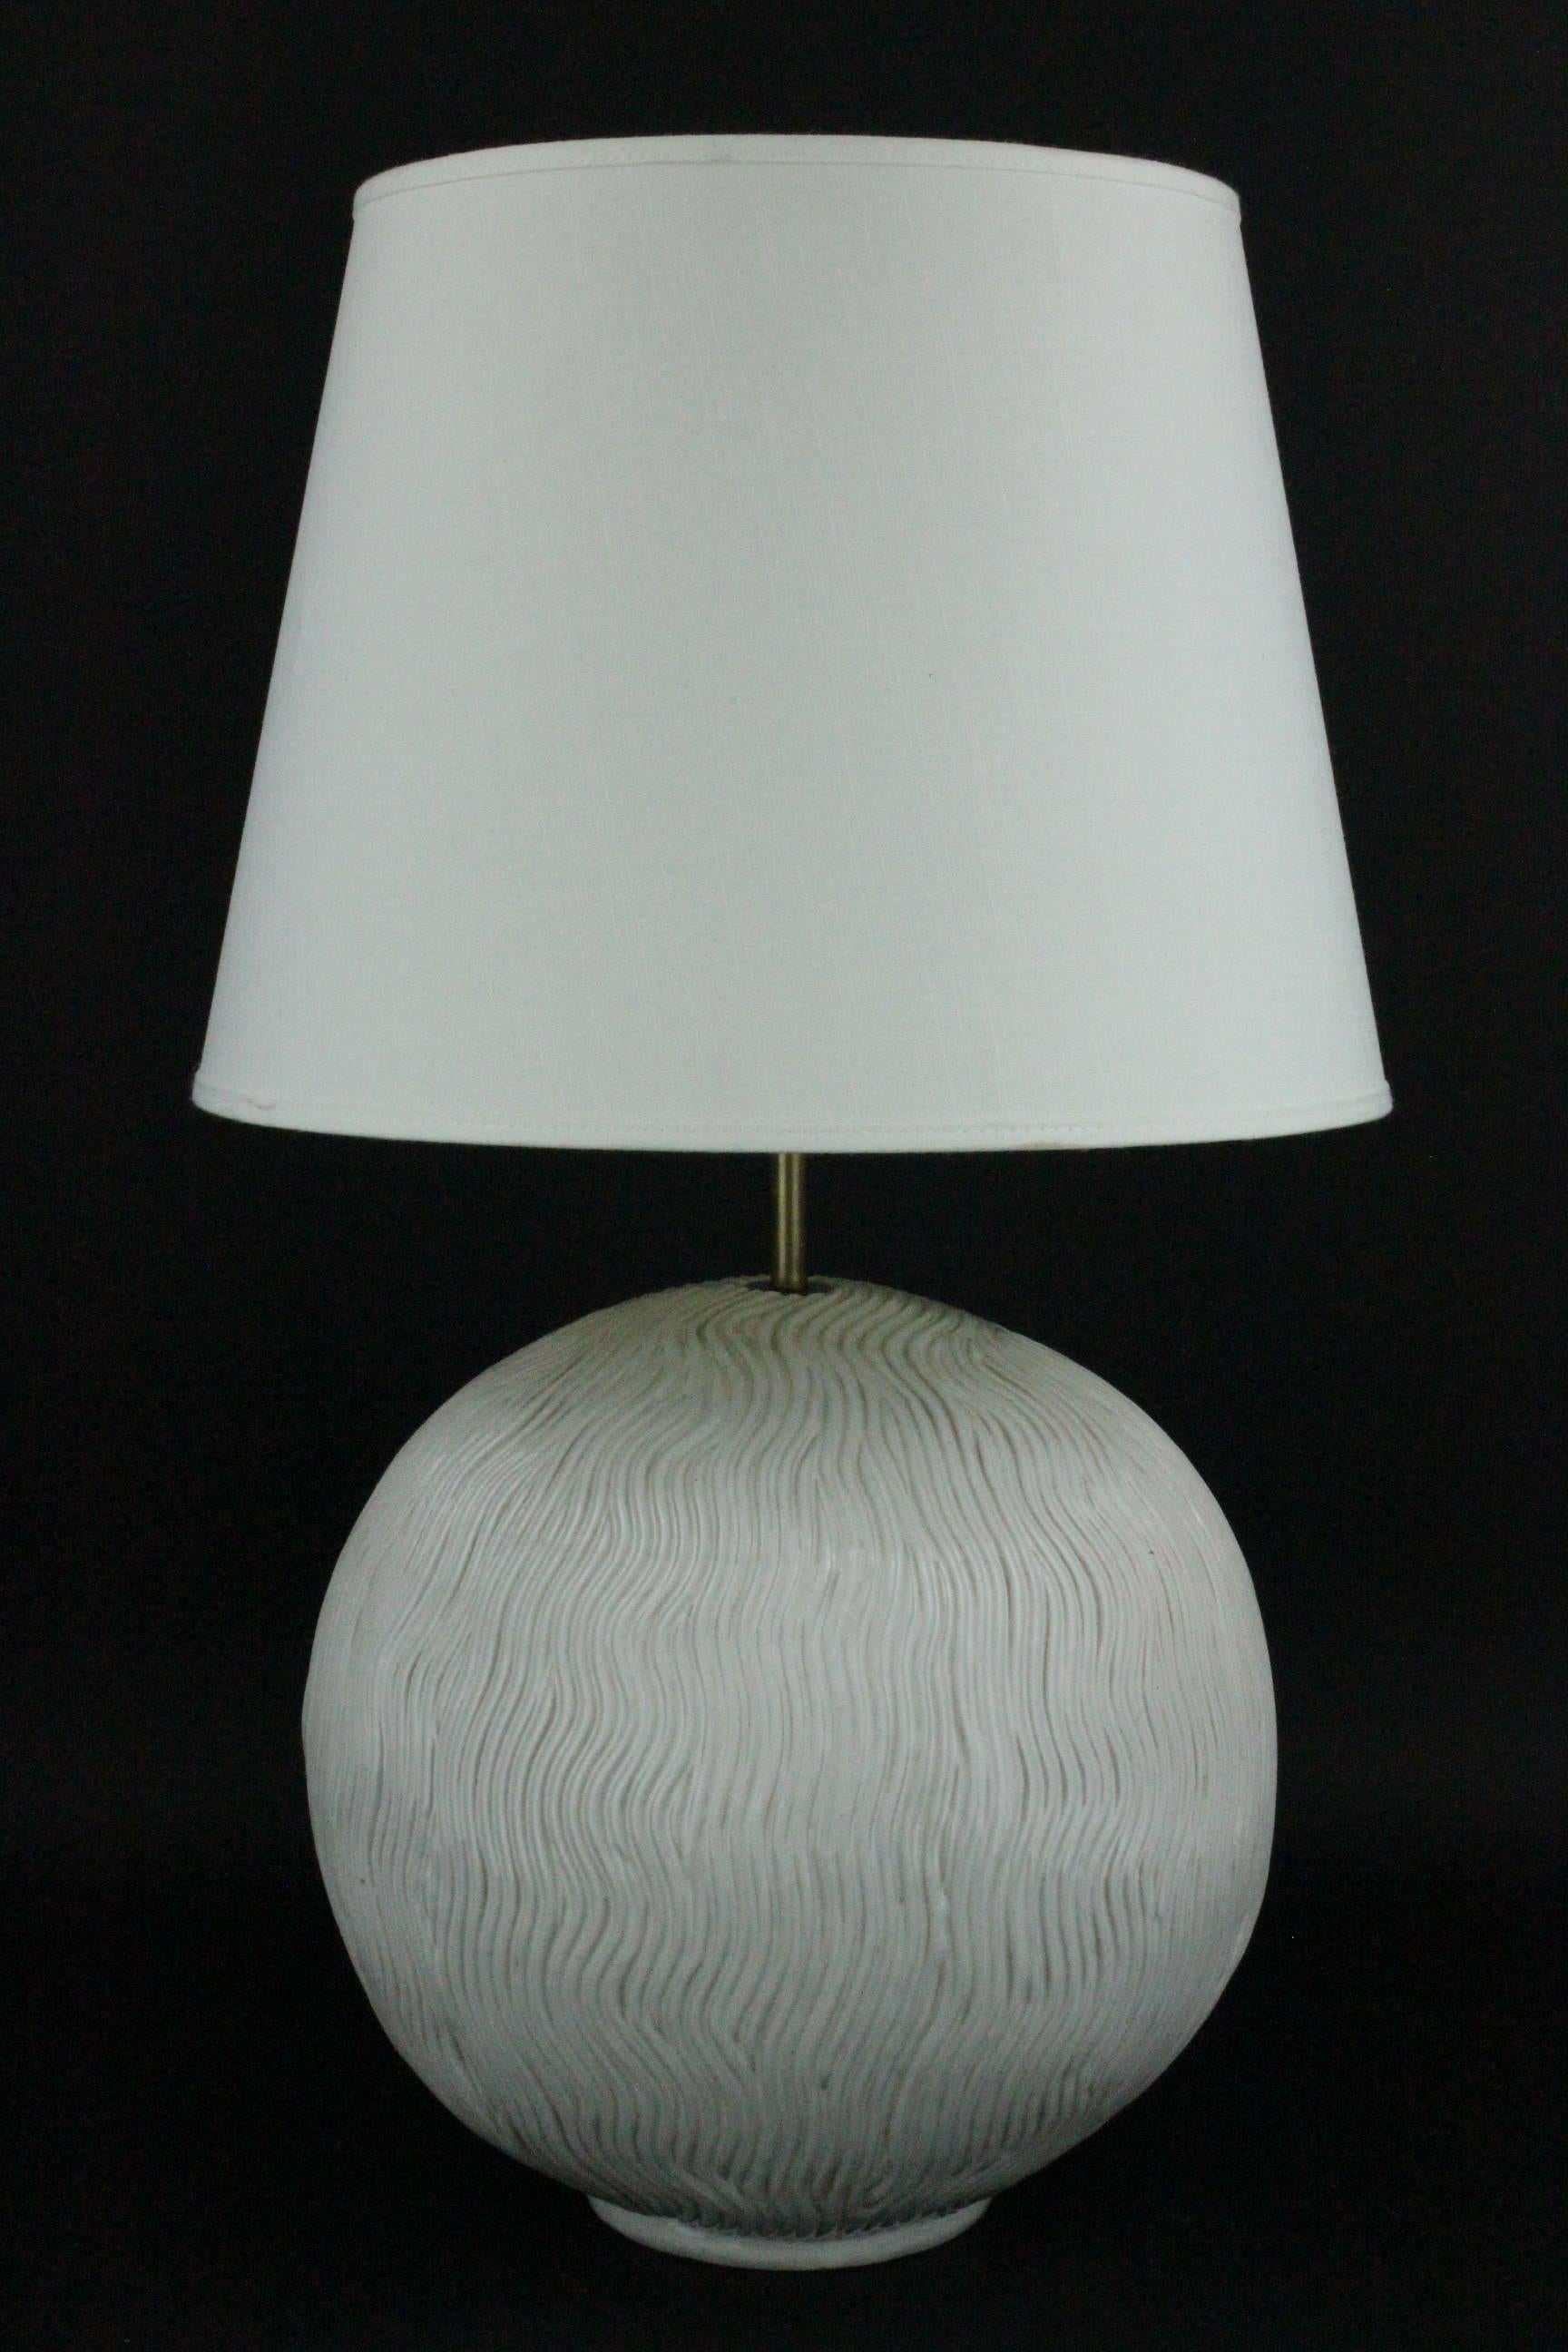 The best Zaccagnini ceramic lamp I have ever seen. The full signature means that this is hand thrown and handmade and done in a very small edition or possibly unique. Made with a wavy relief pattern. In full working order. Height with shade 68 cm.